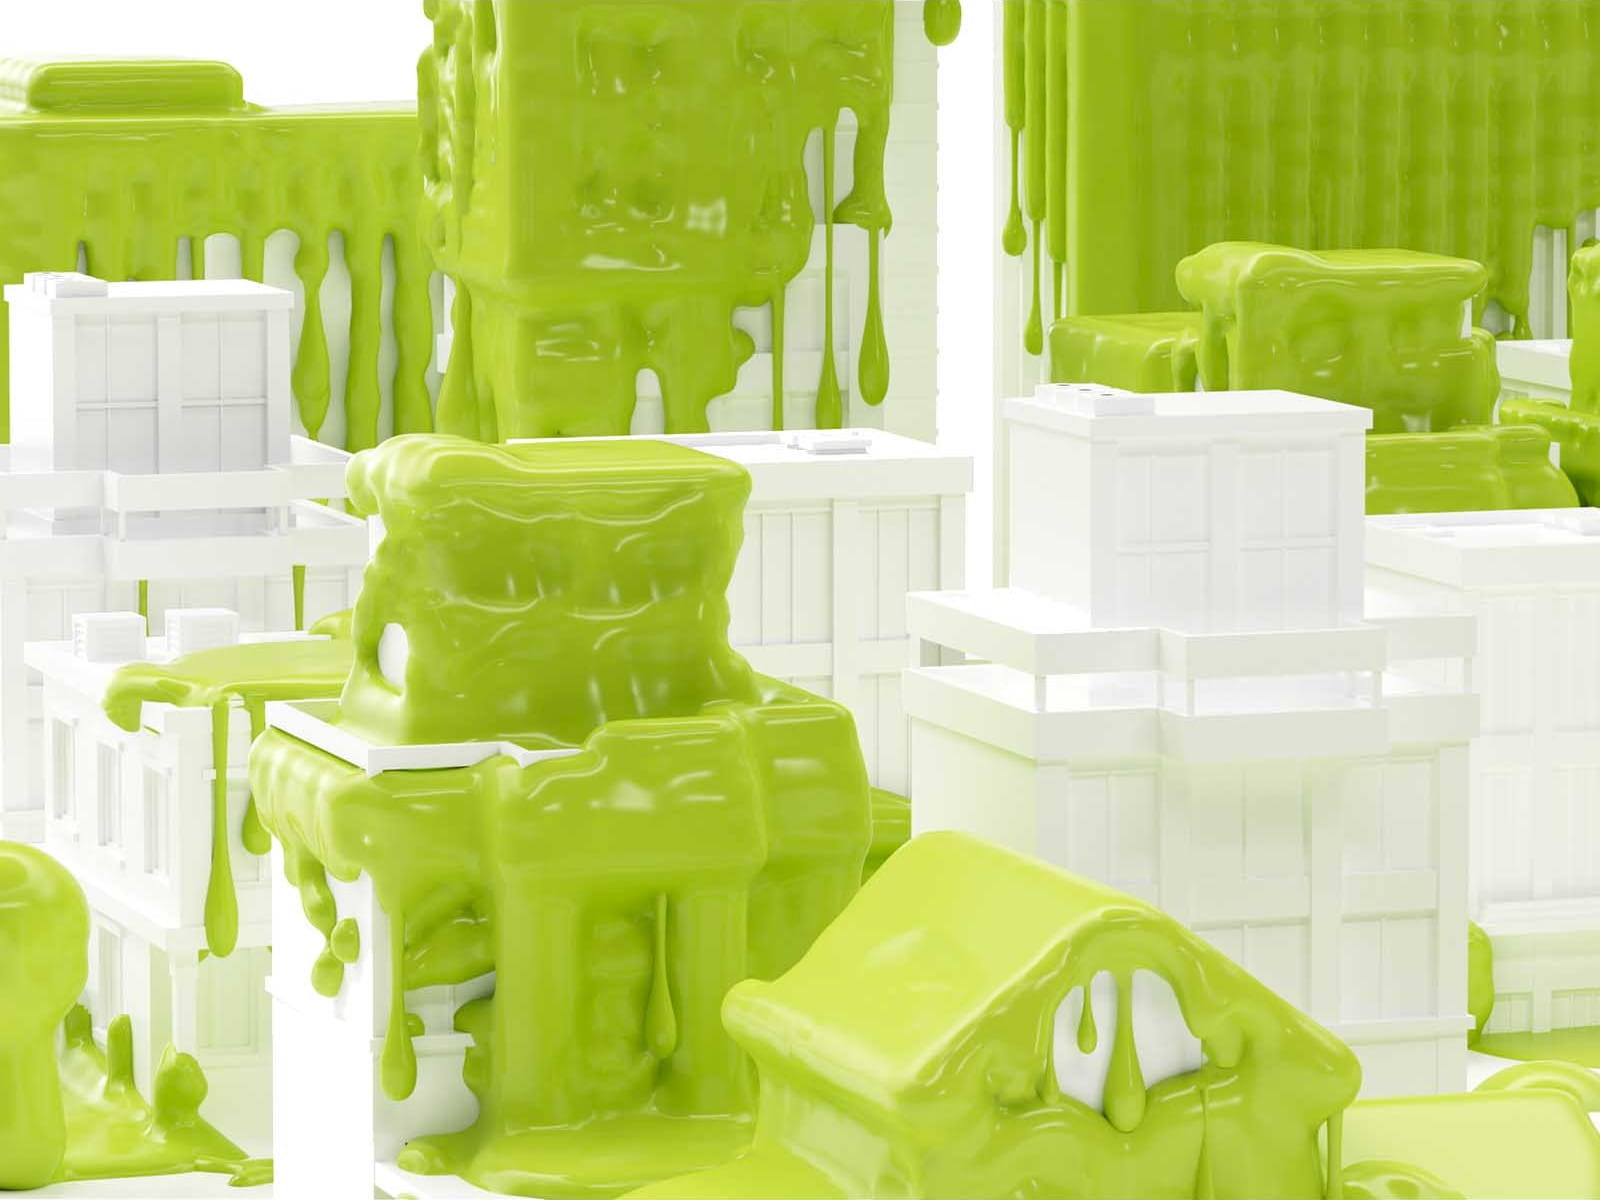 green paint splattered poured onto white model city buildings greenwashing